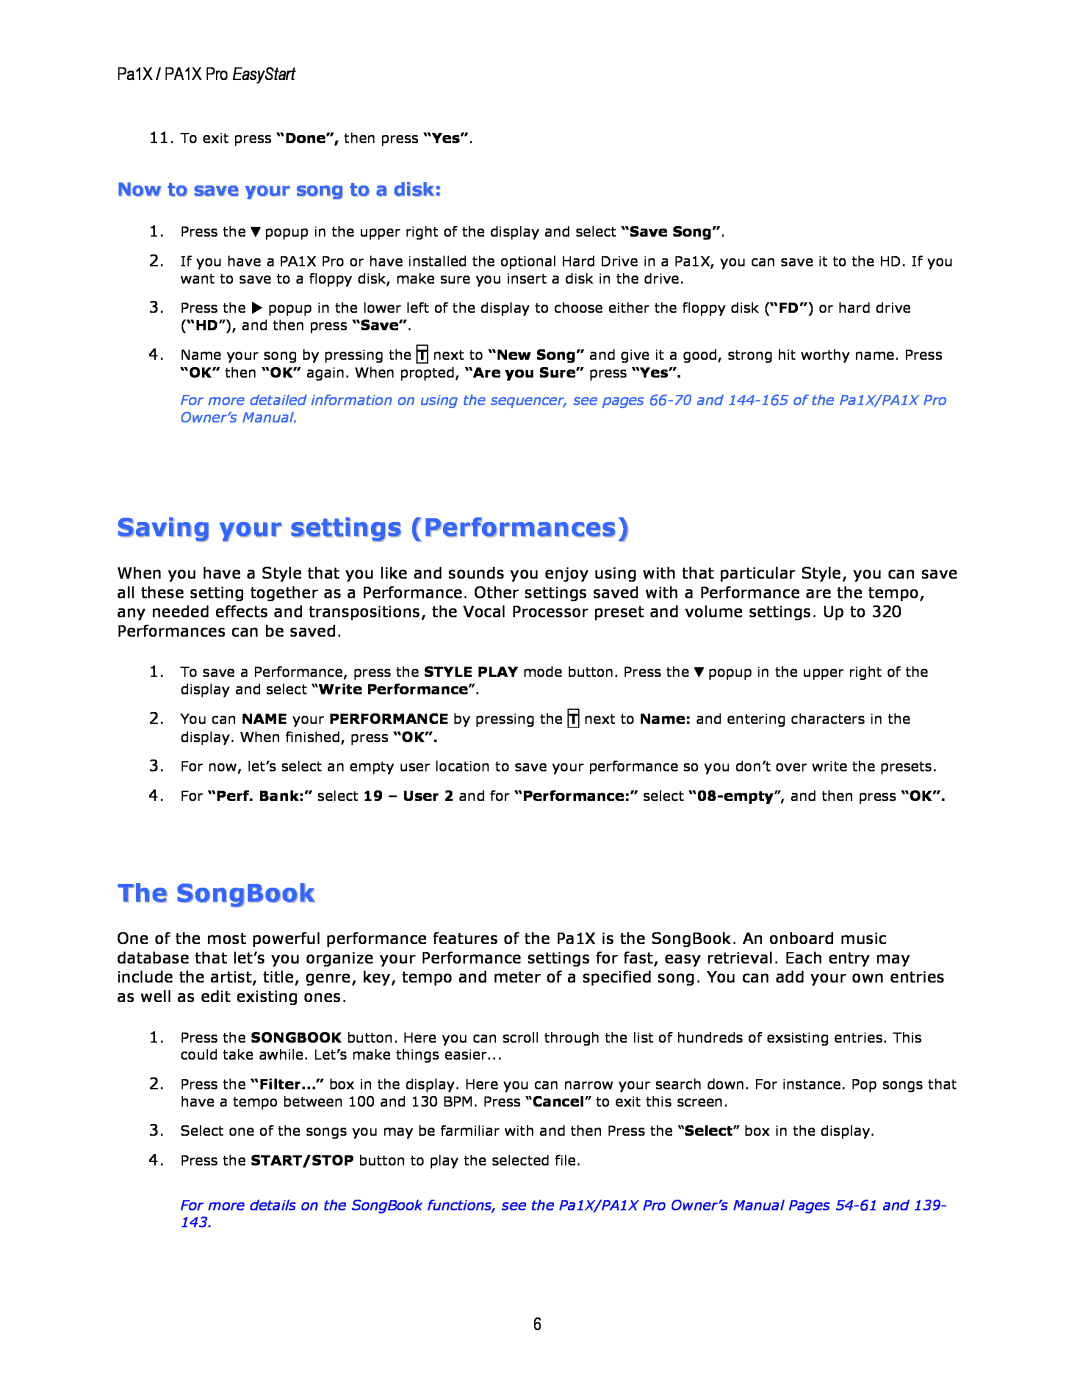 Korg Saving your settings Performances, The SongBook, Pa1X / PA1X Pro EasyStart, Now to save your song to a disk 